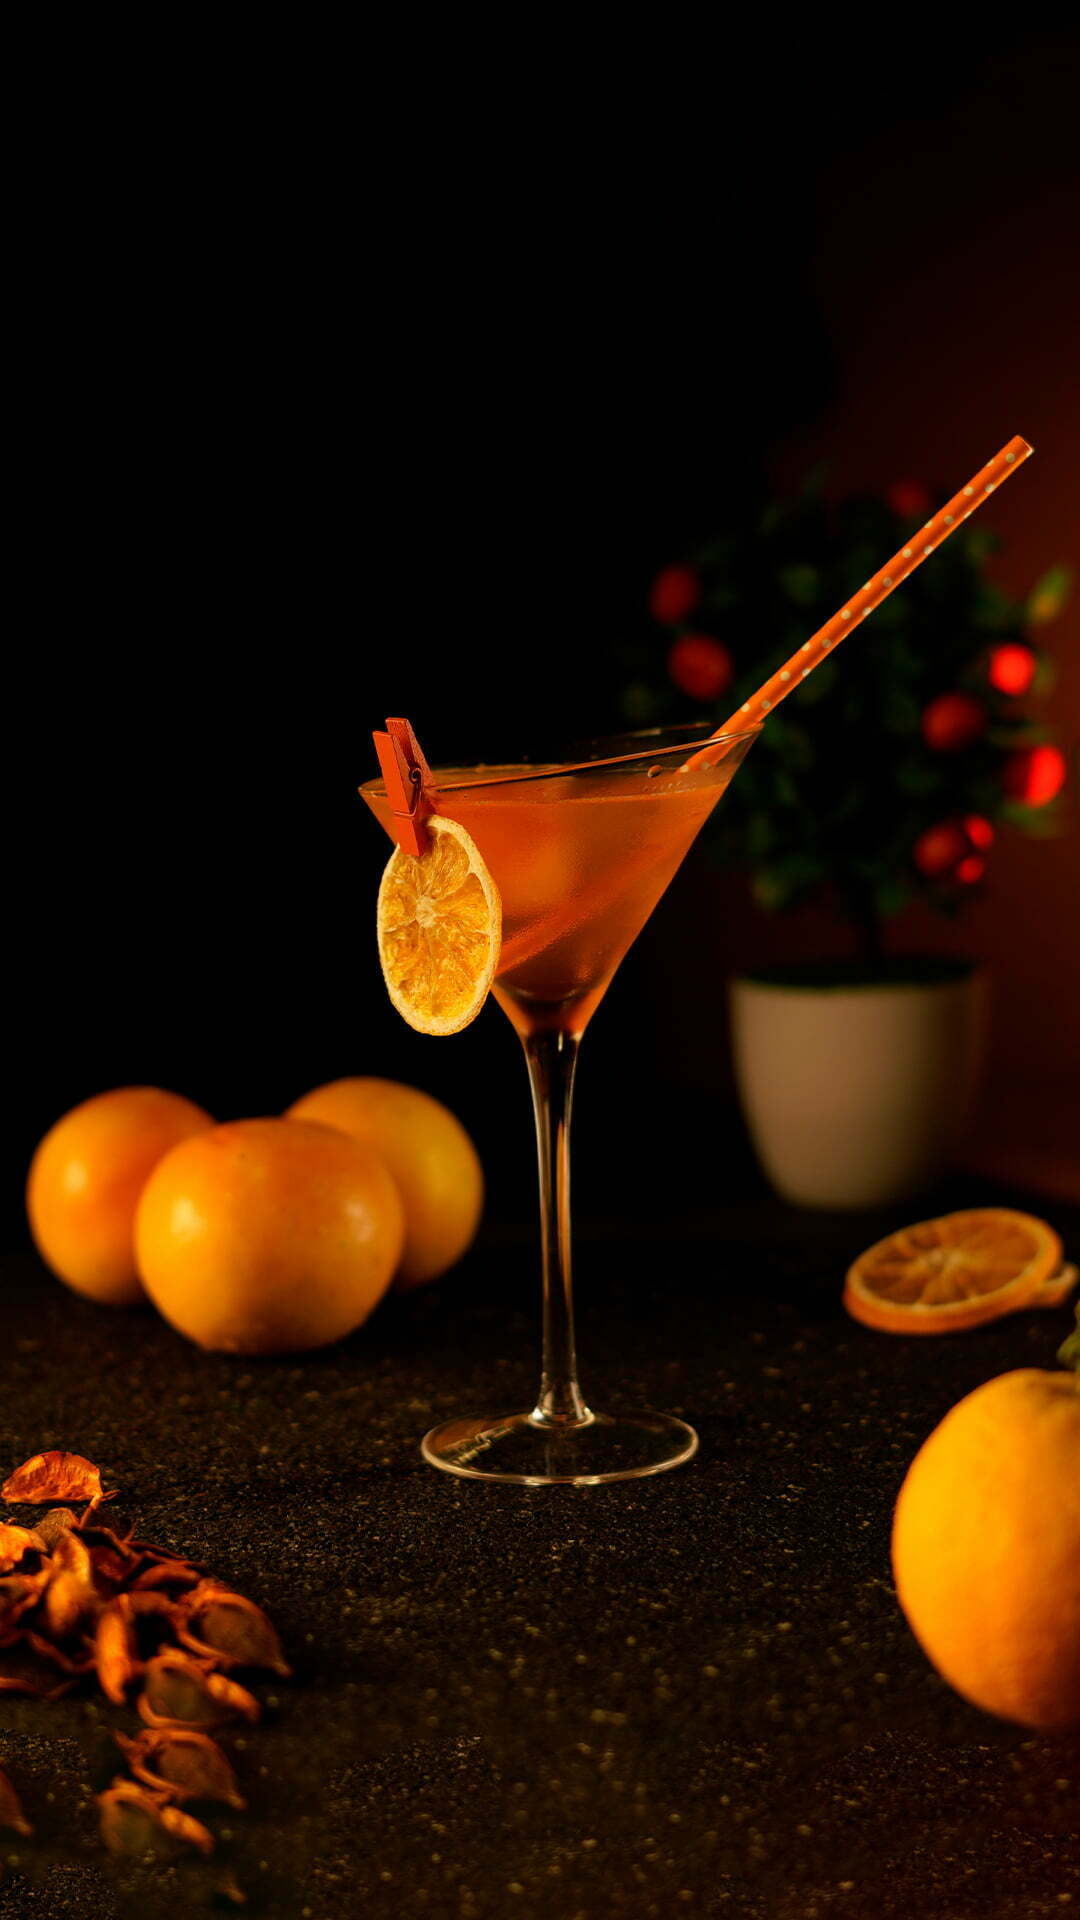 Orange cocktail in a martini glass placed in a dark background next to oranges